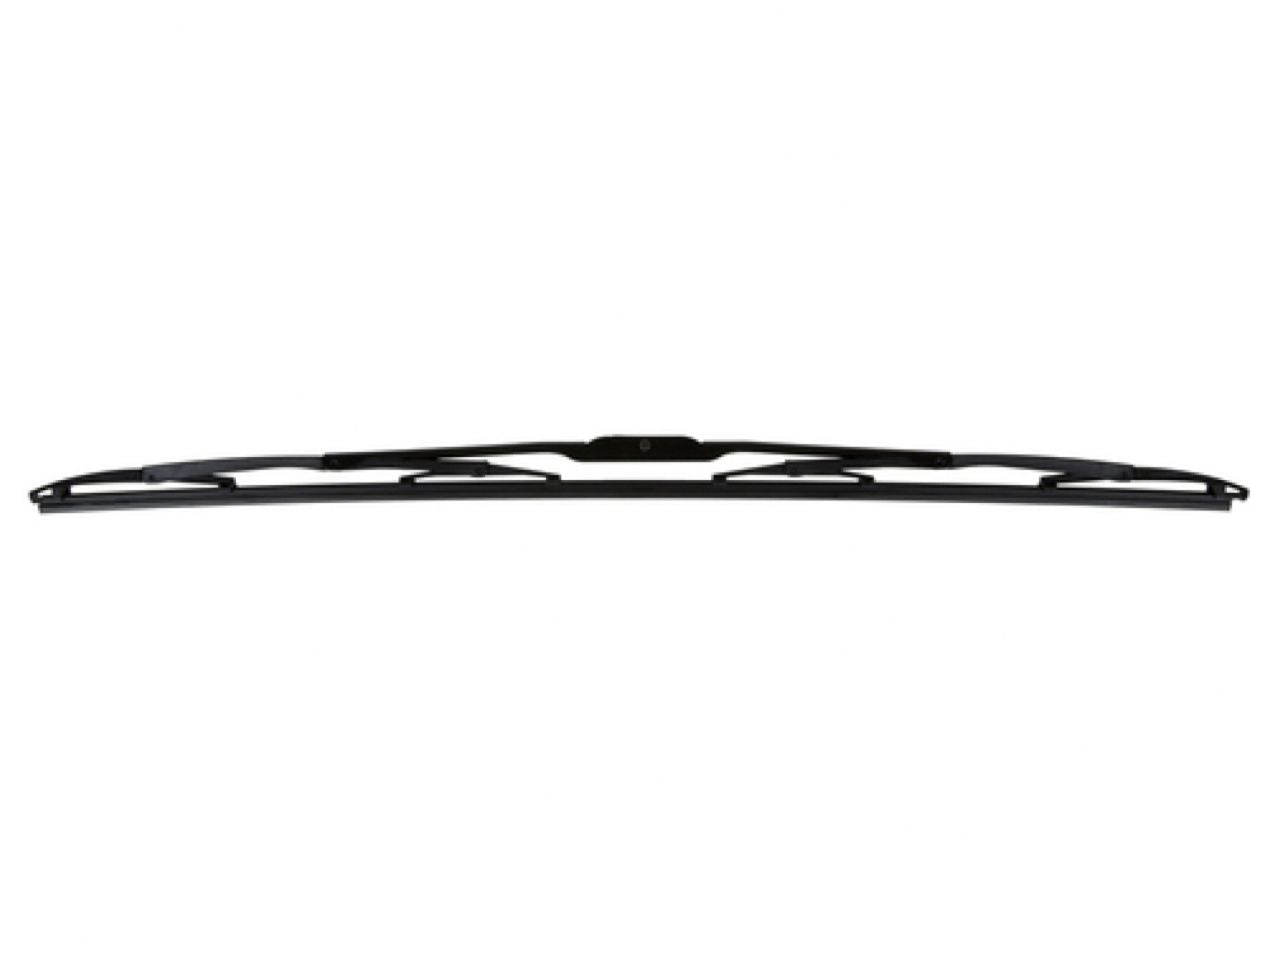 Anco Windshield Wipers 31-26 Item Image